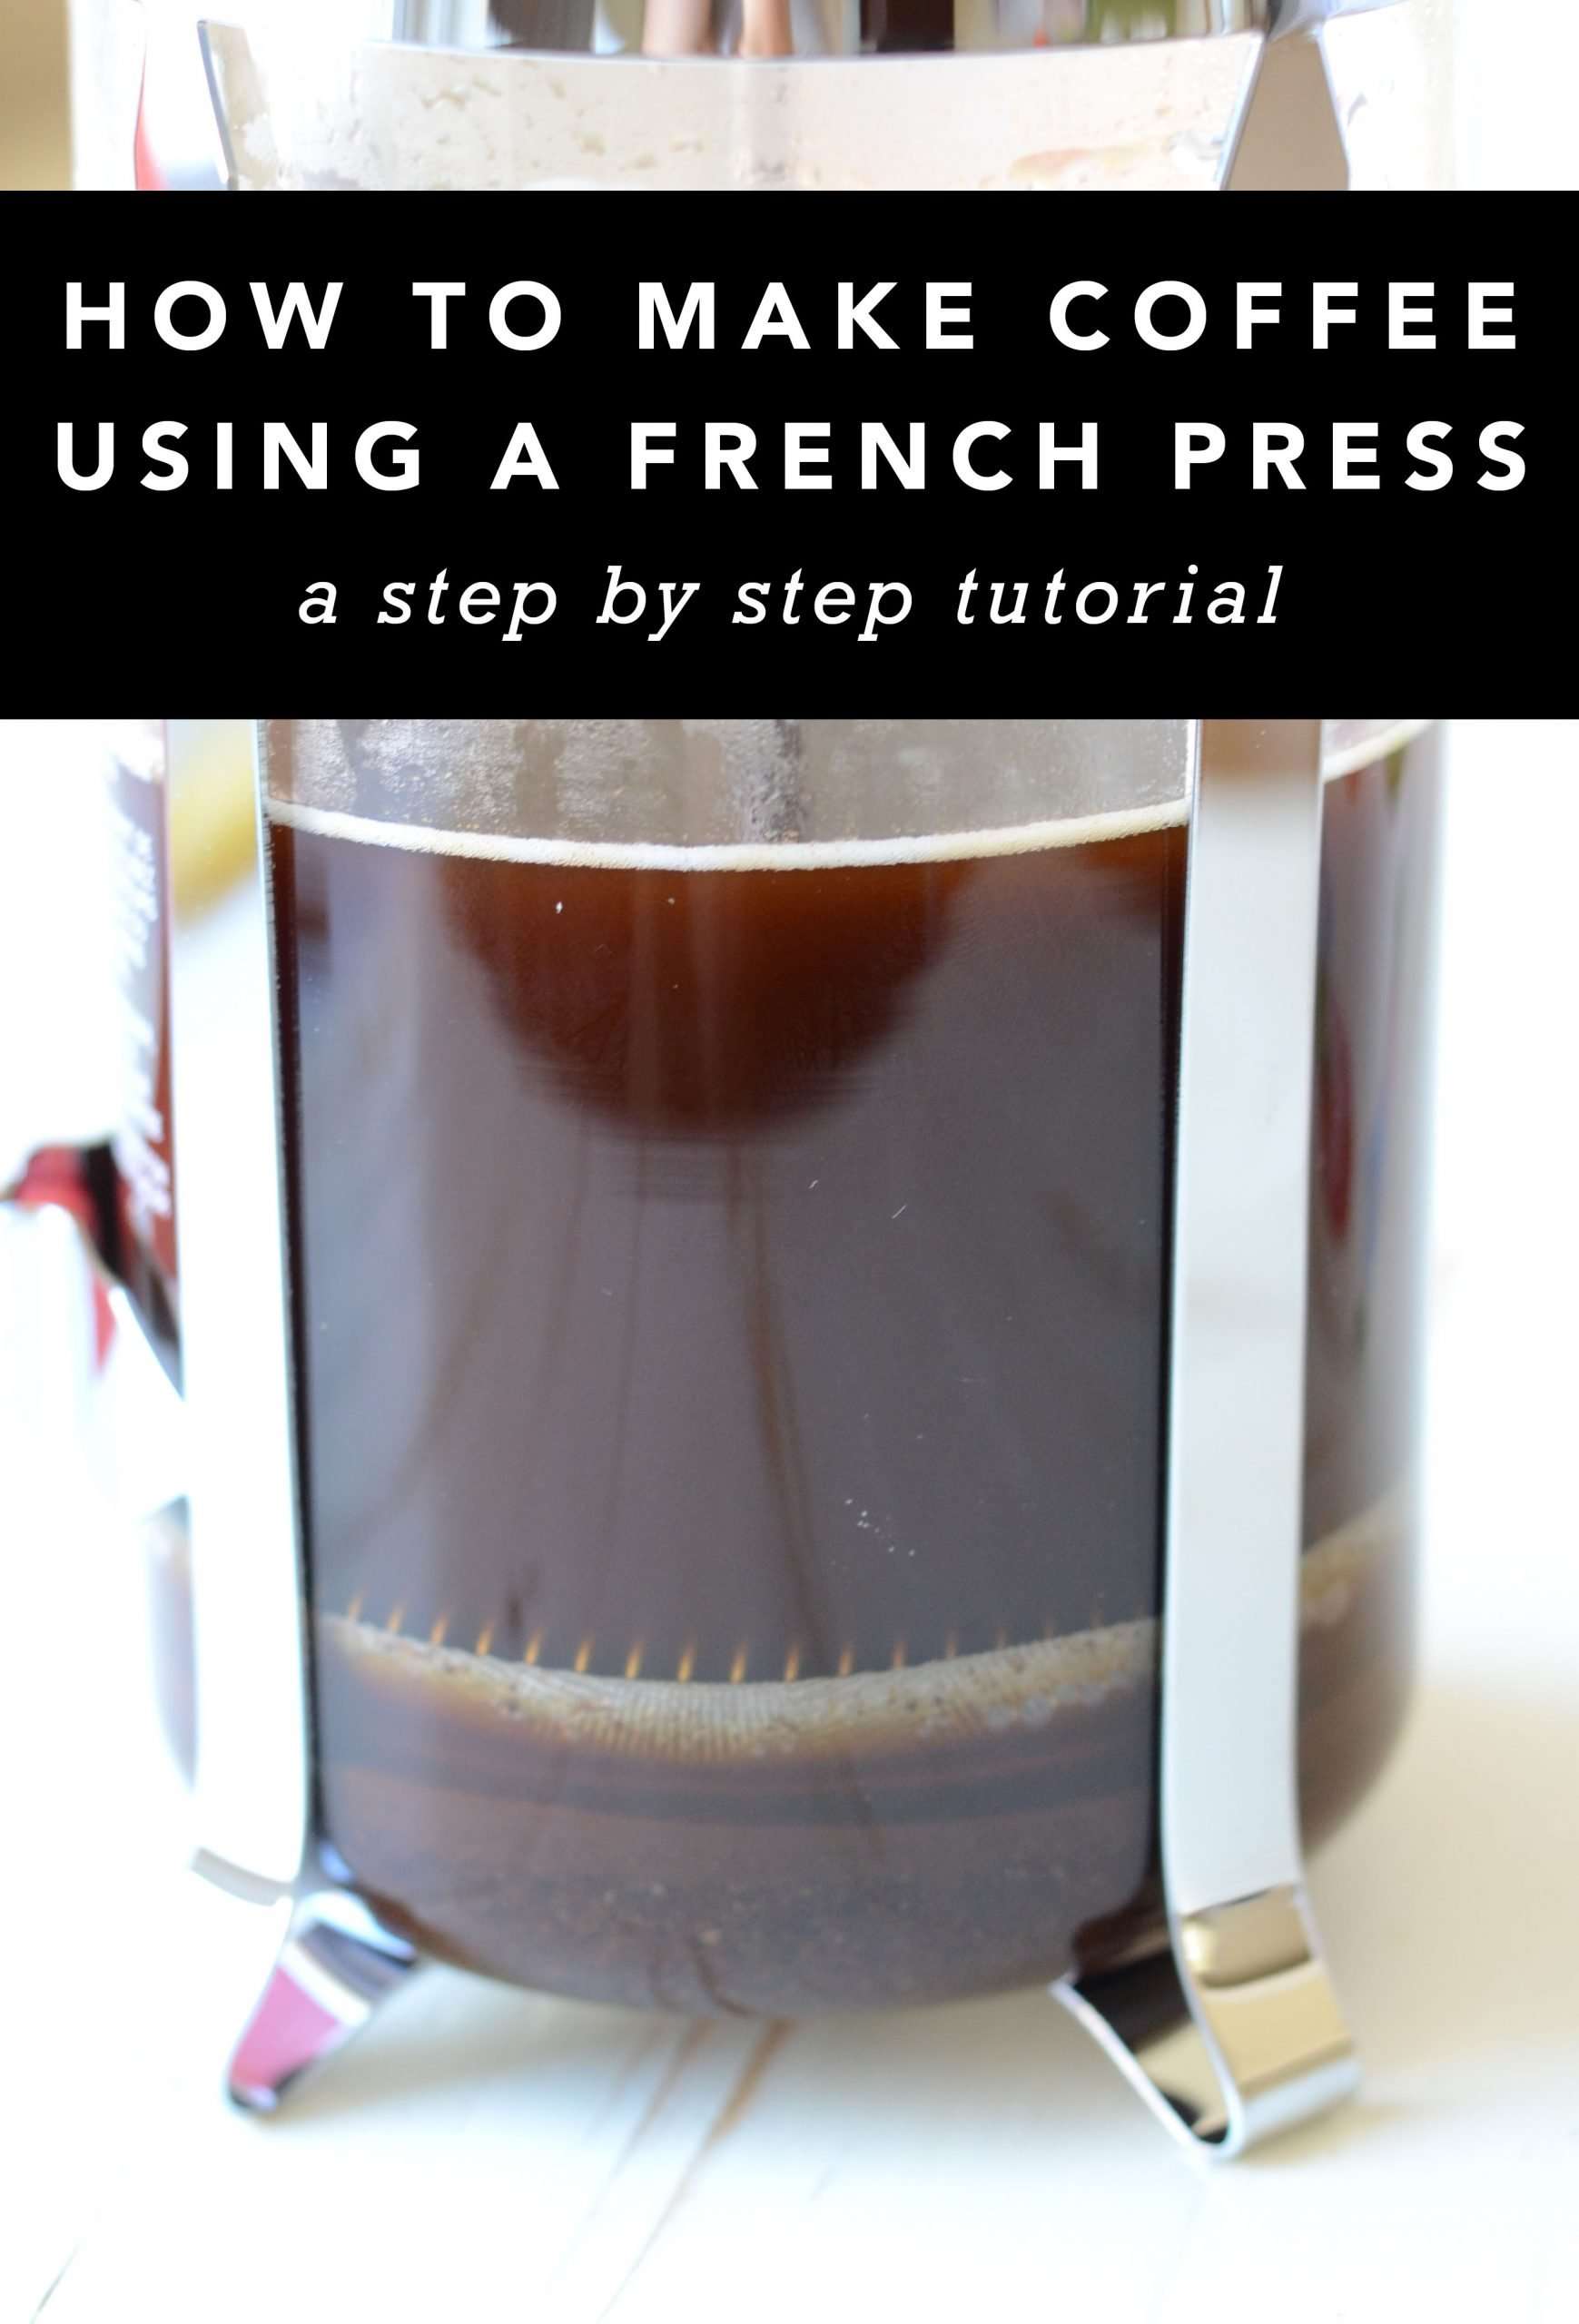 How to Make Coffee Using a French Press (Tutorial)